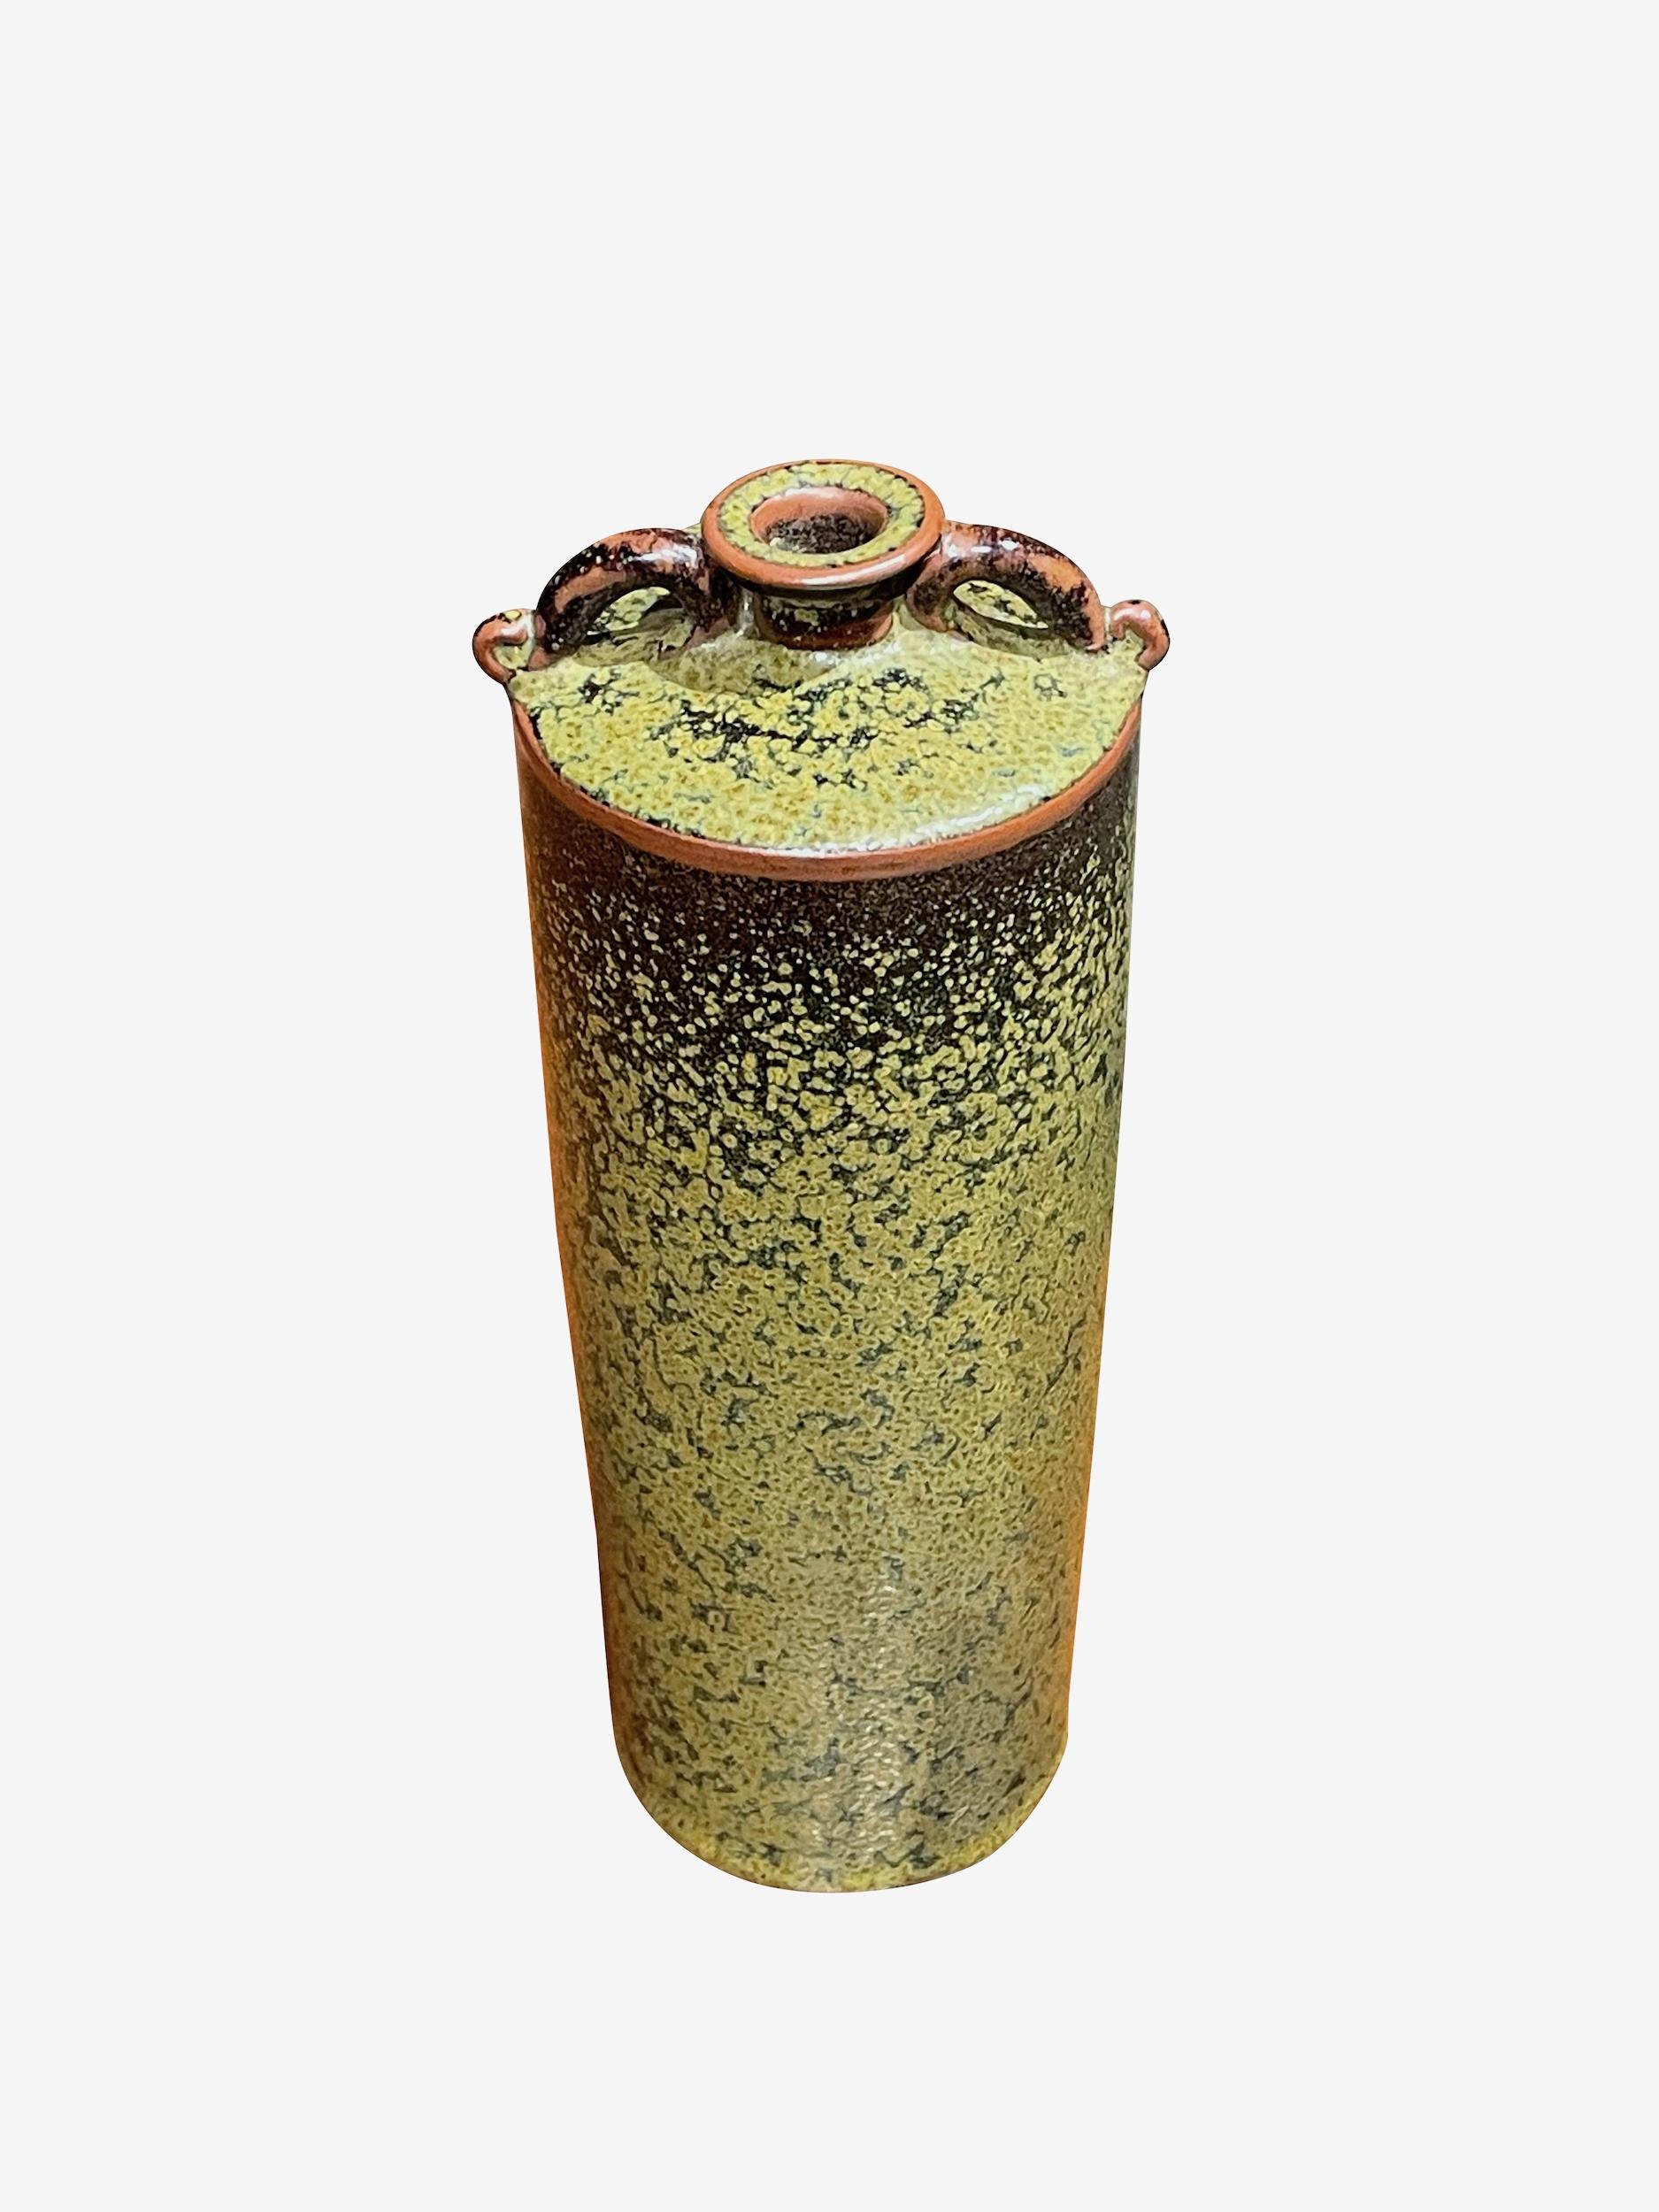 Contemporary Chinese black and green speckled glaze vase.
Cylinder shape with two small handles at small spout opening.
One of three from a collection that sit well together. ( S6412 / S6414 )